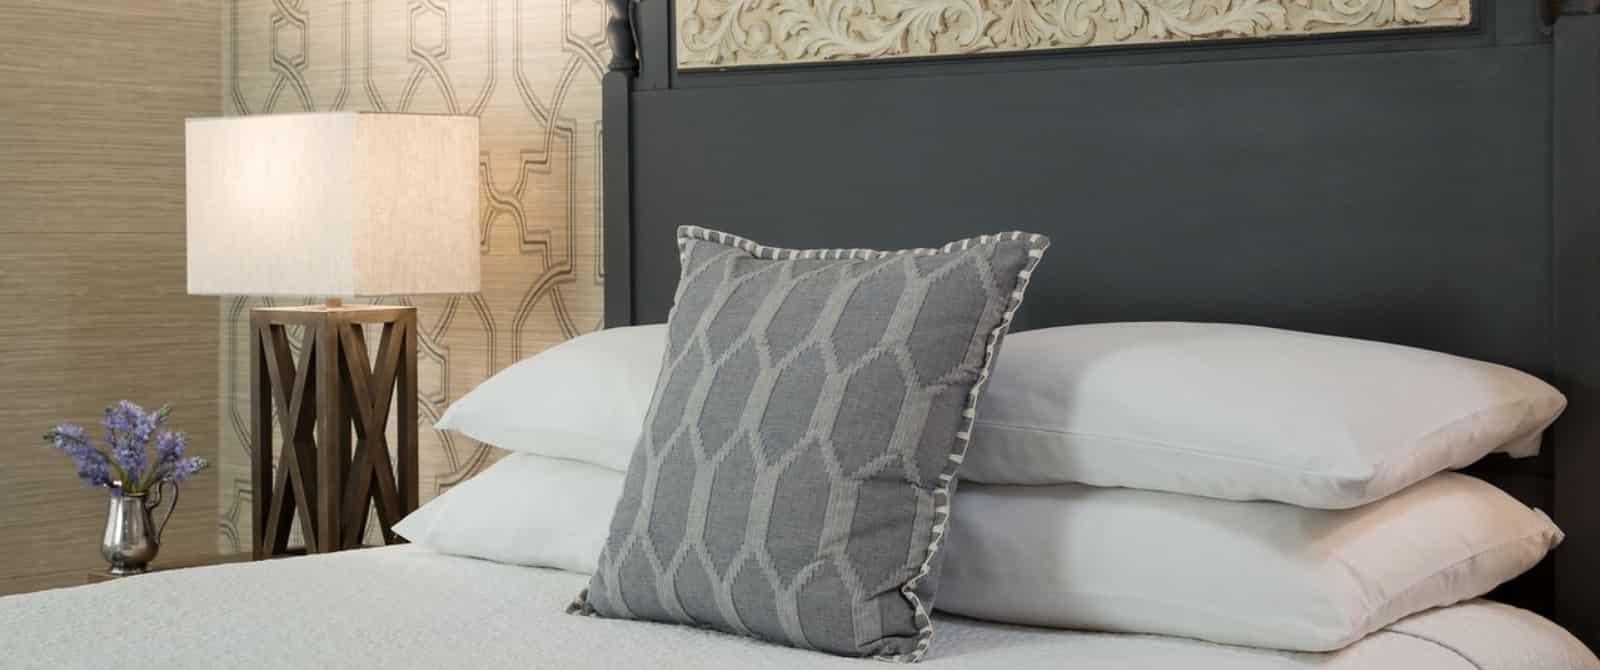 Close up view of bed with dark wooden headboard, white bedding, gray pillow, and wooden lamp